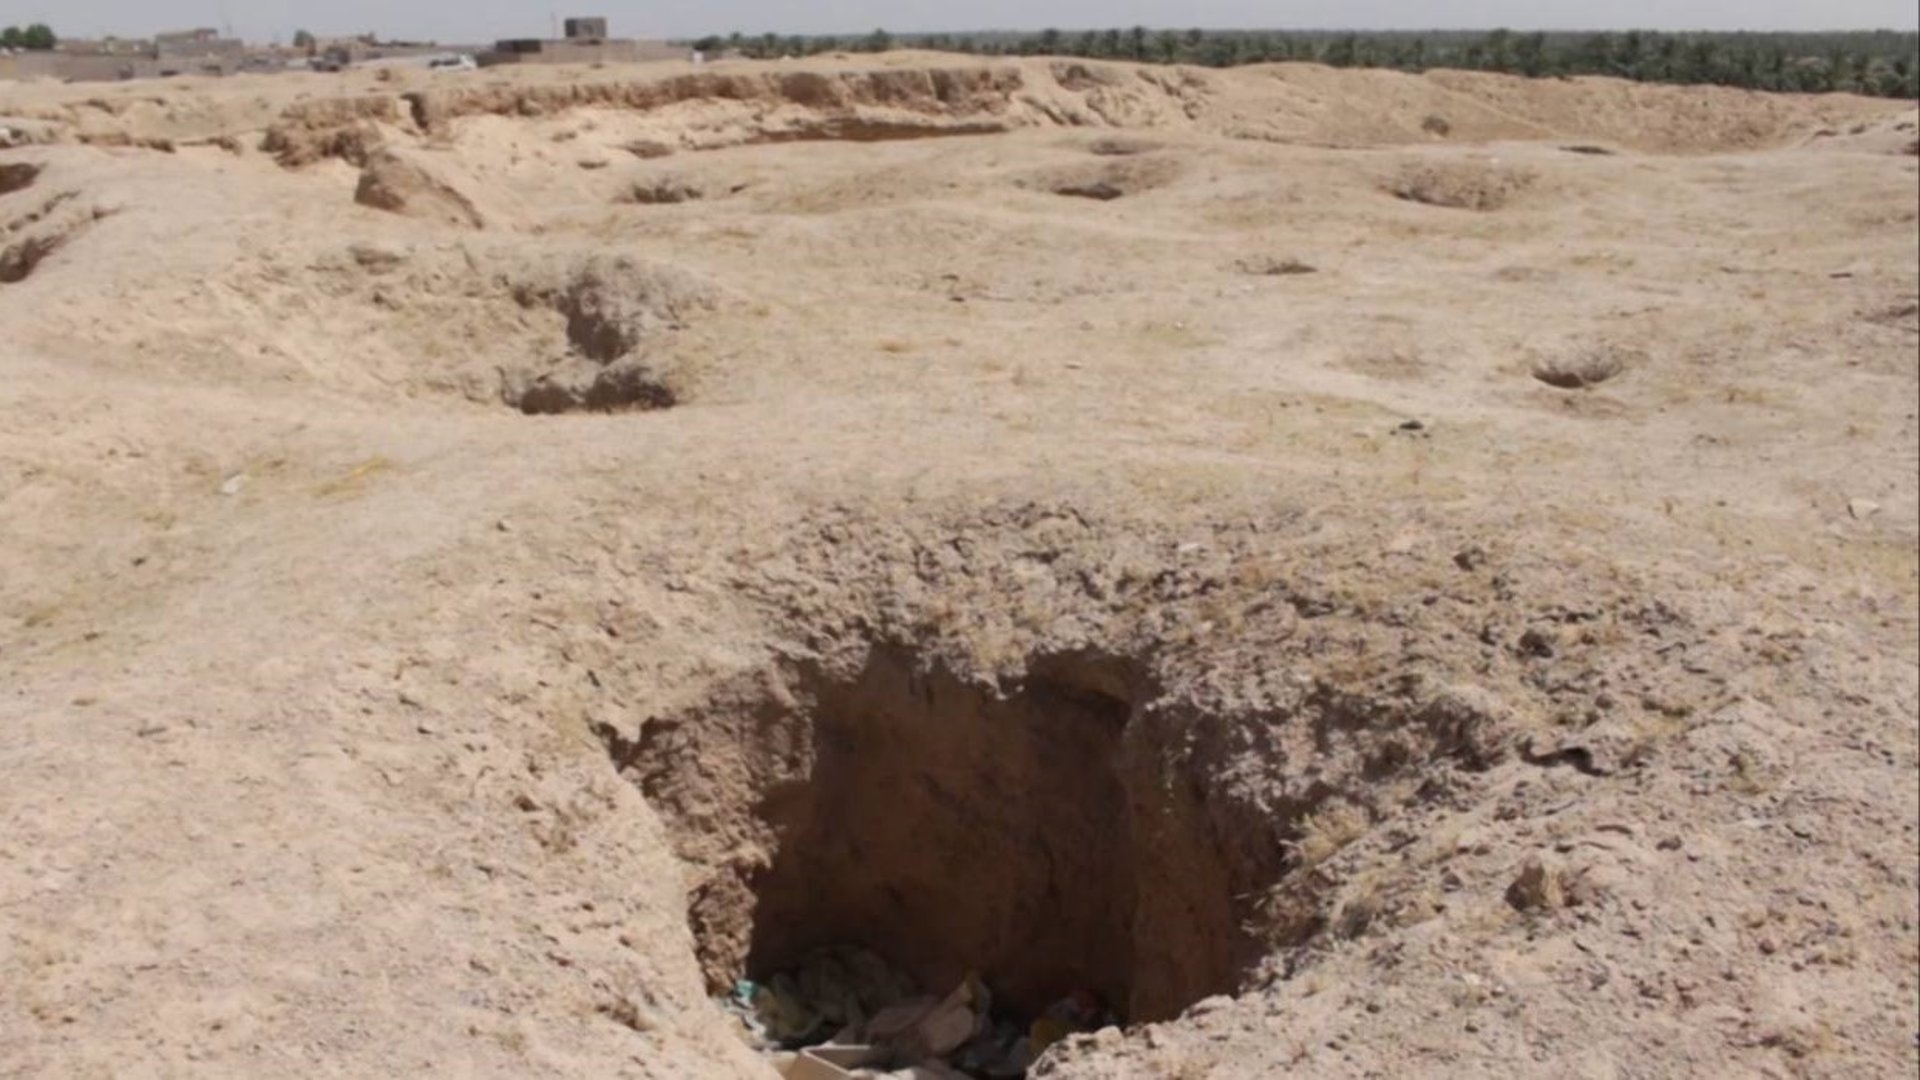 Uproar in Najaf as municipality announces development on ancient Christian burial grounds